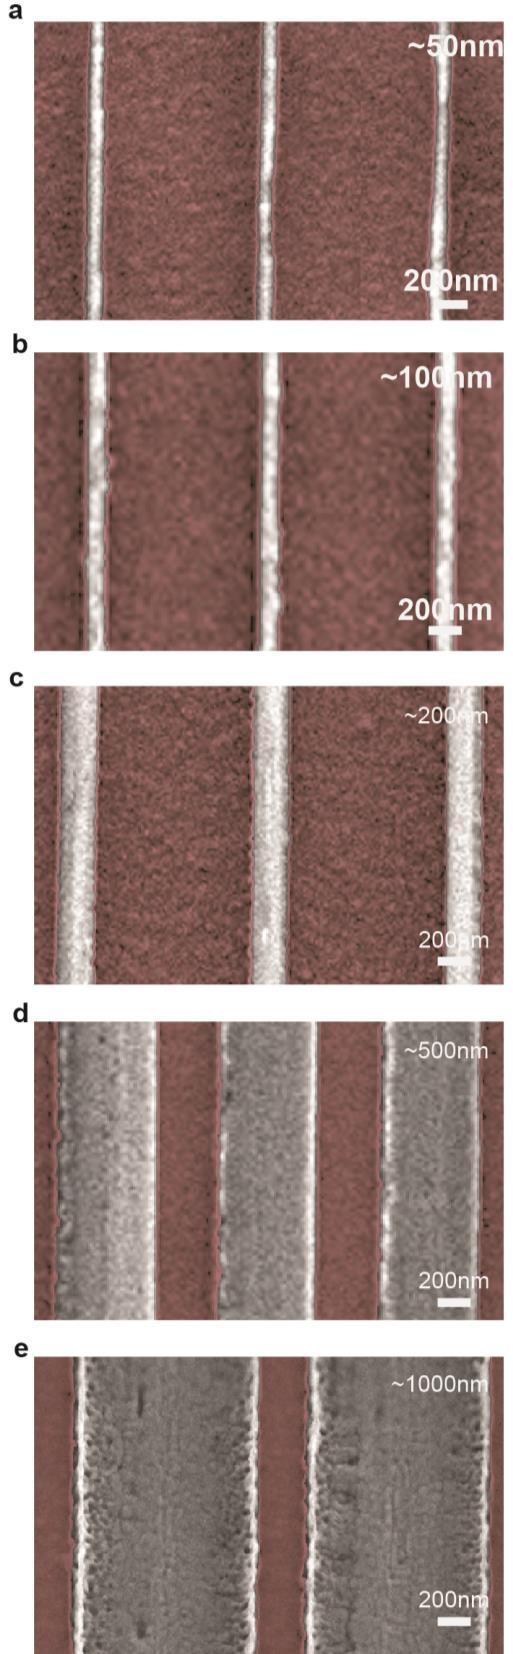 SEM characterization of micro-fabricated periodic array Fig. S1.